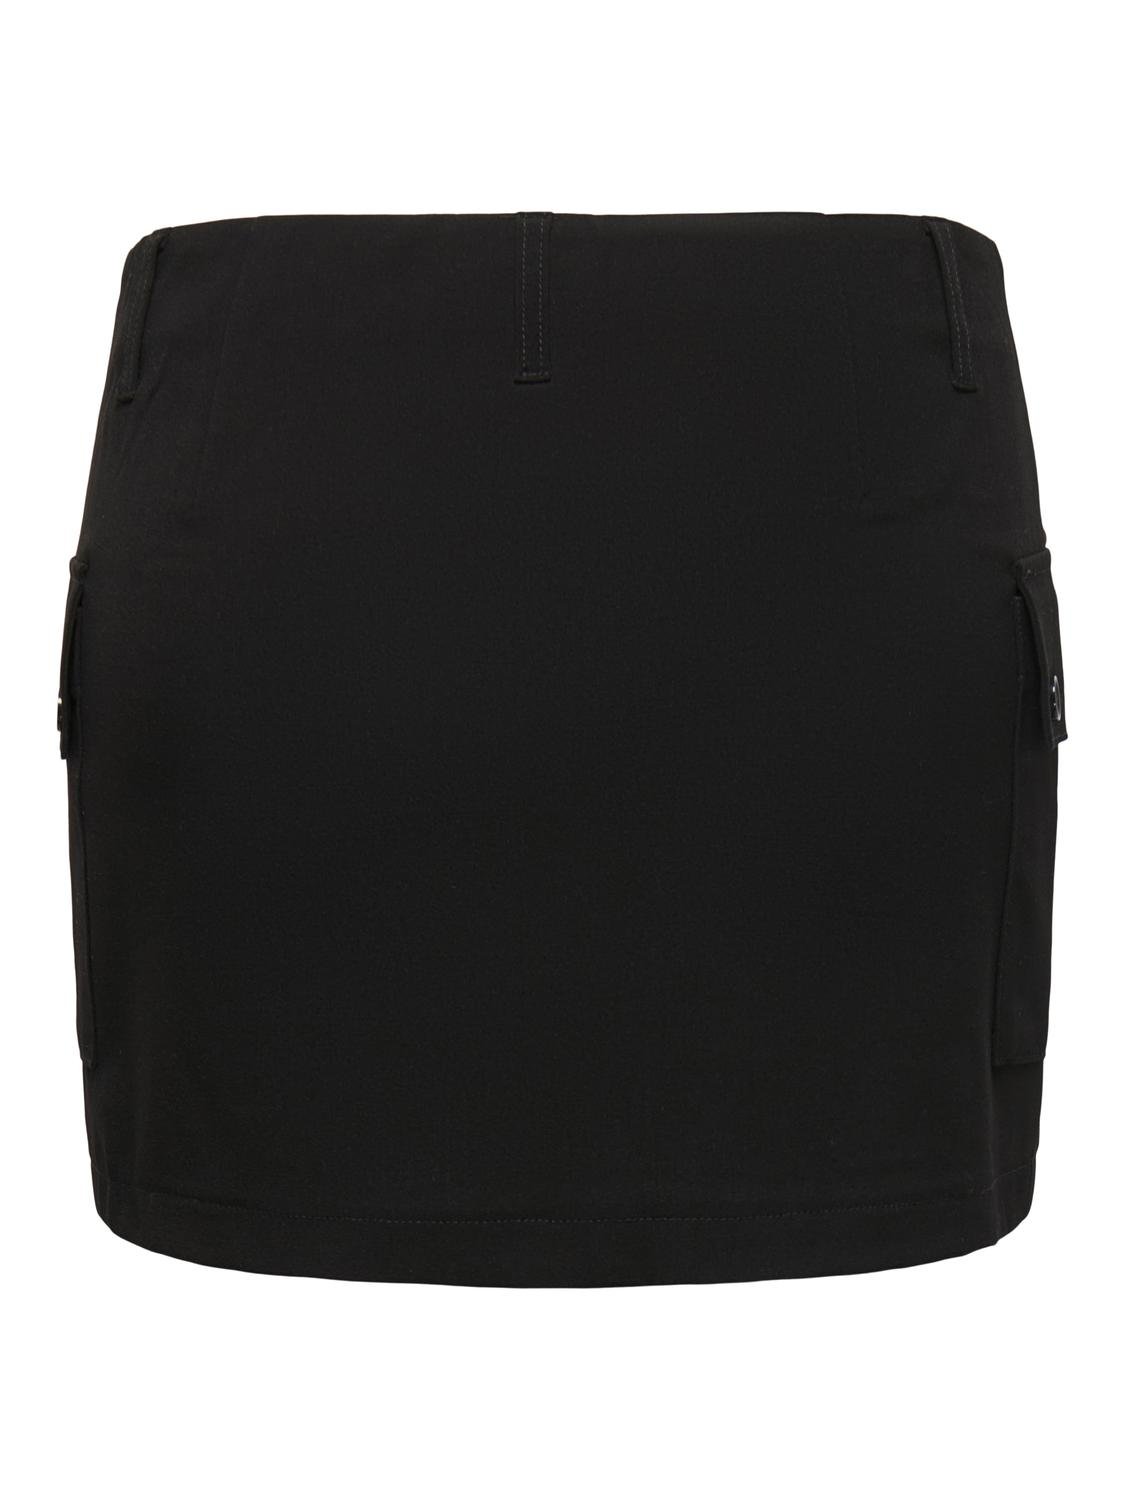 ONLY Jupe mini Taille moyenne -Black - 15298713